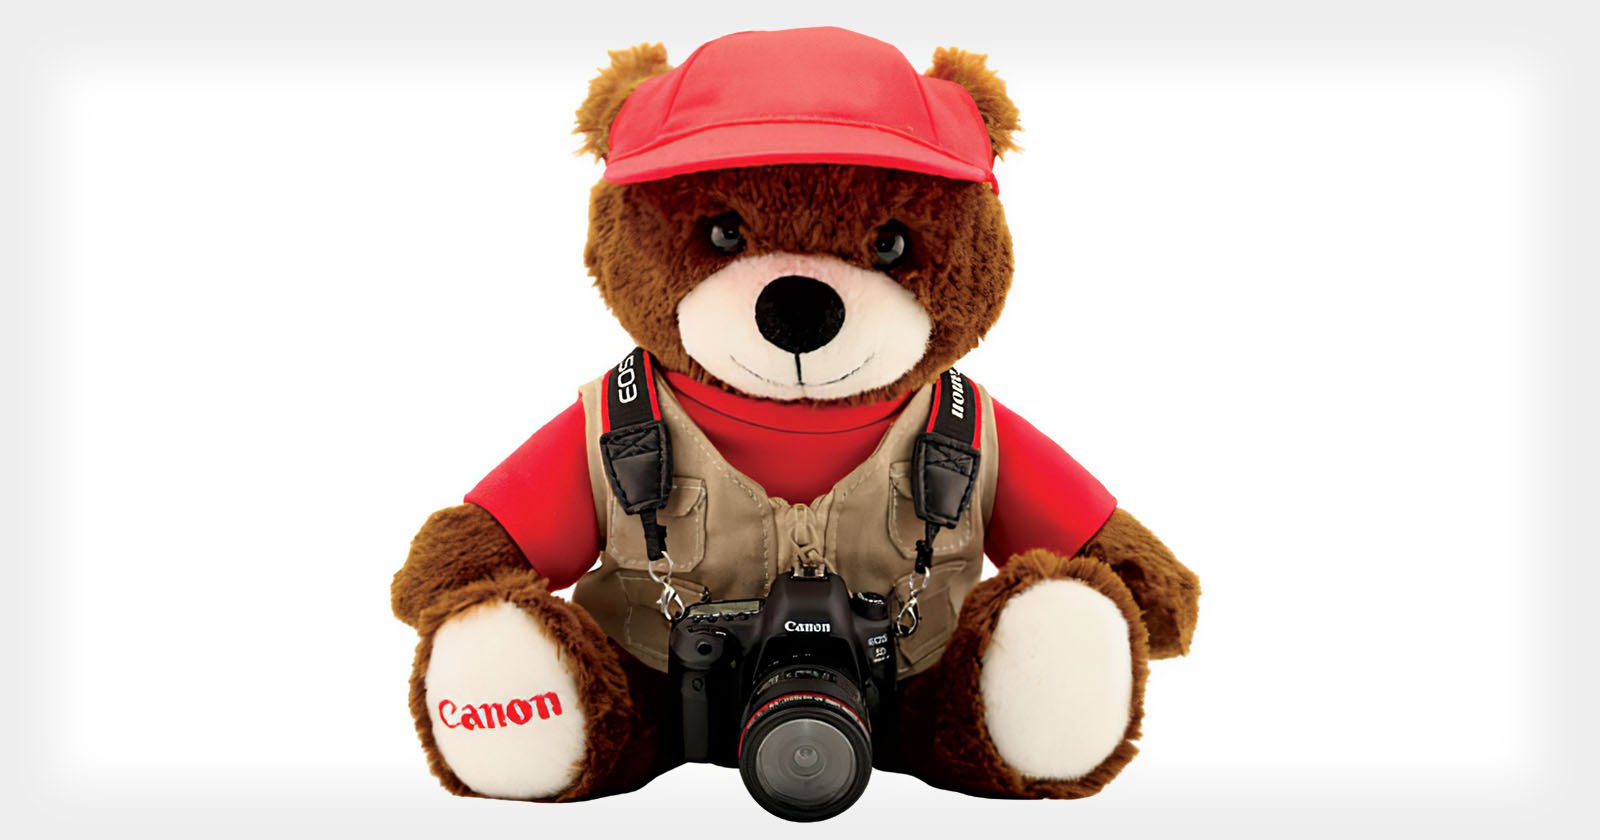 This Official Canon Teddy Bear Comes with Its Own DSLR | PetaPixel